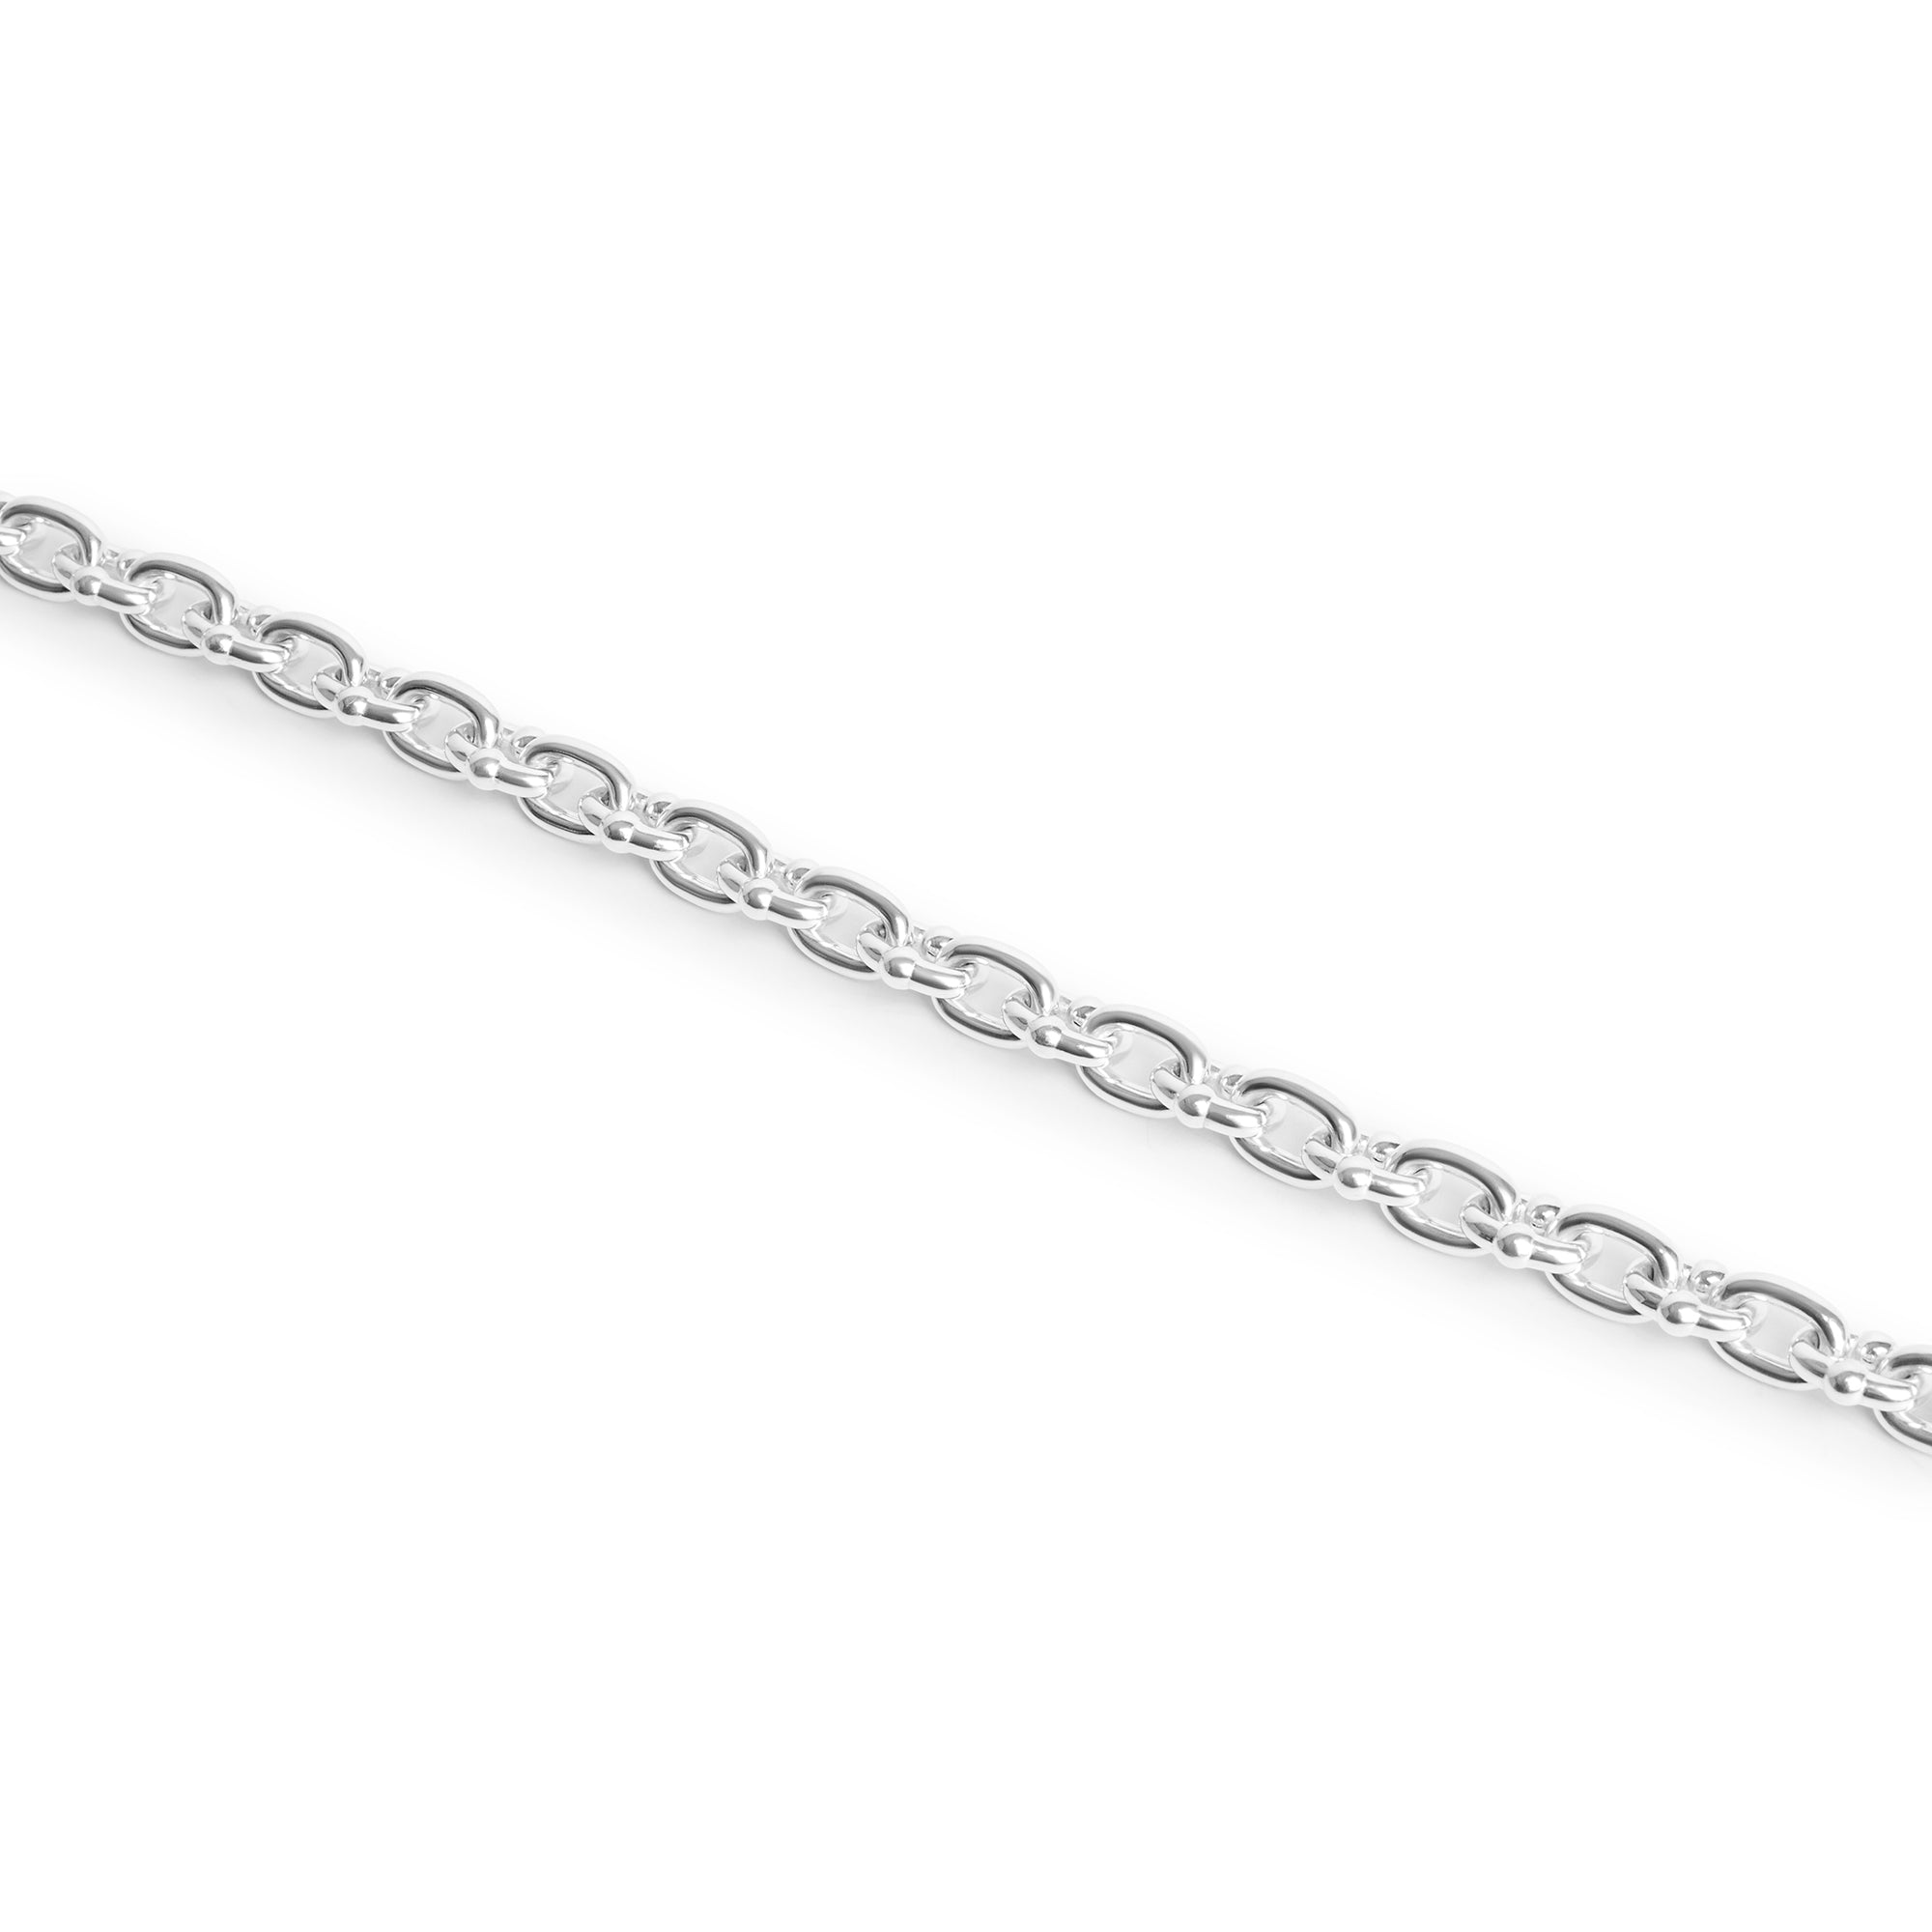 Thick Silver Umlaut Link Necklace